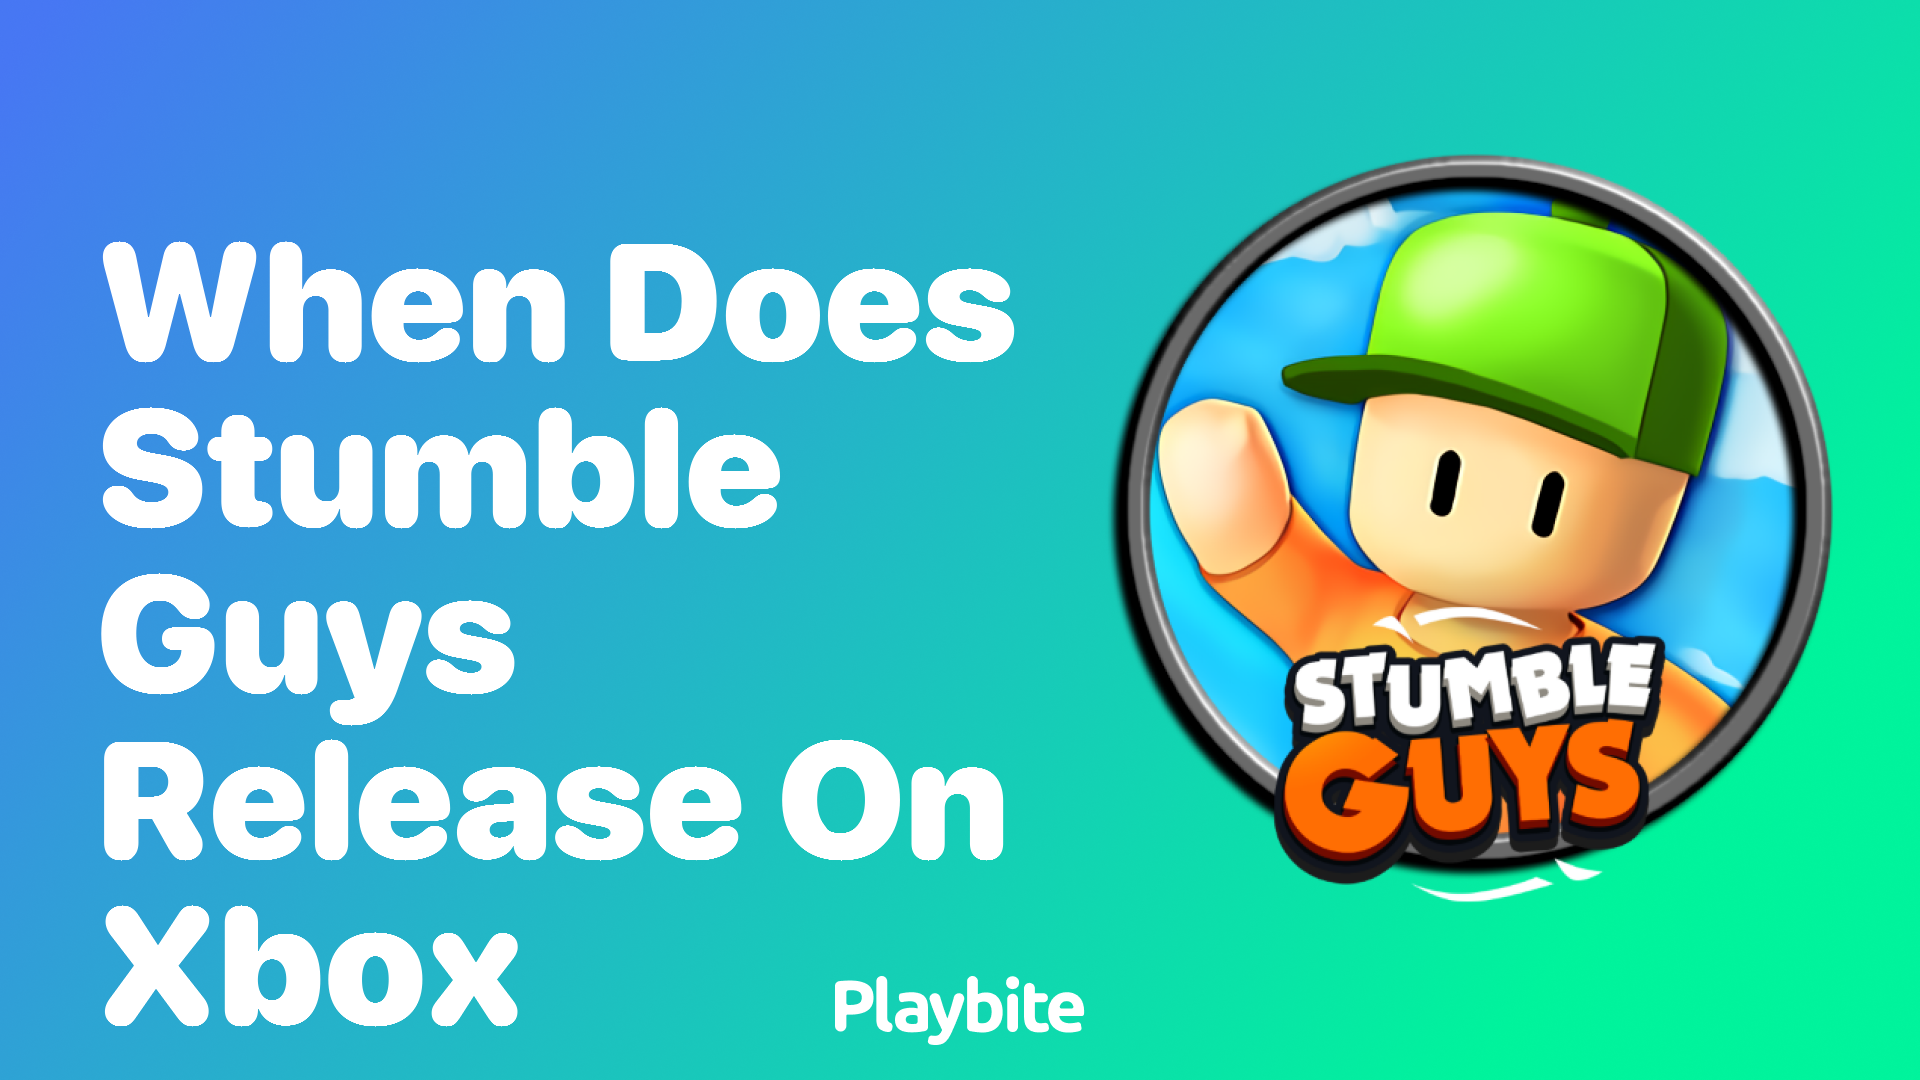 When Does Stumble Guys Release on Xbox?